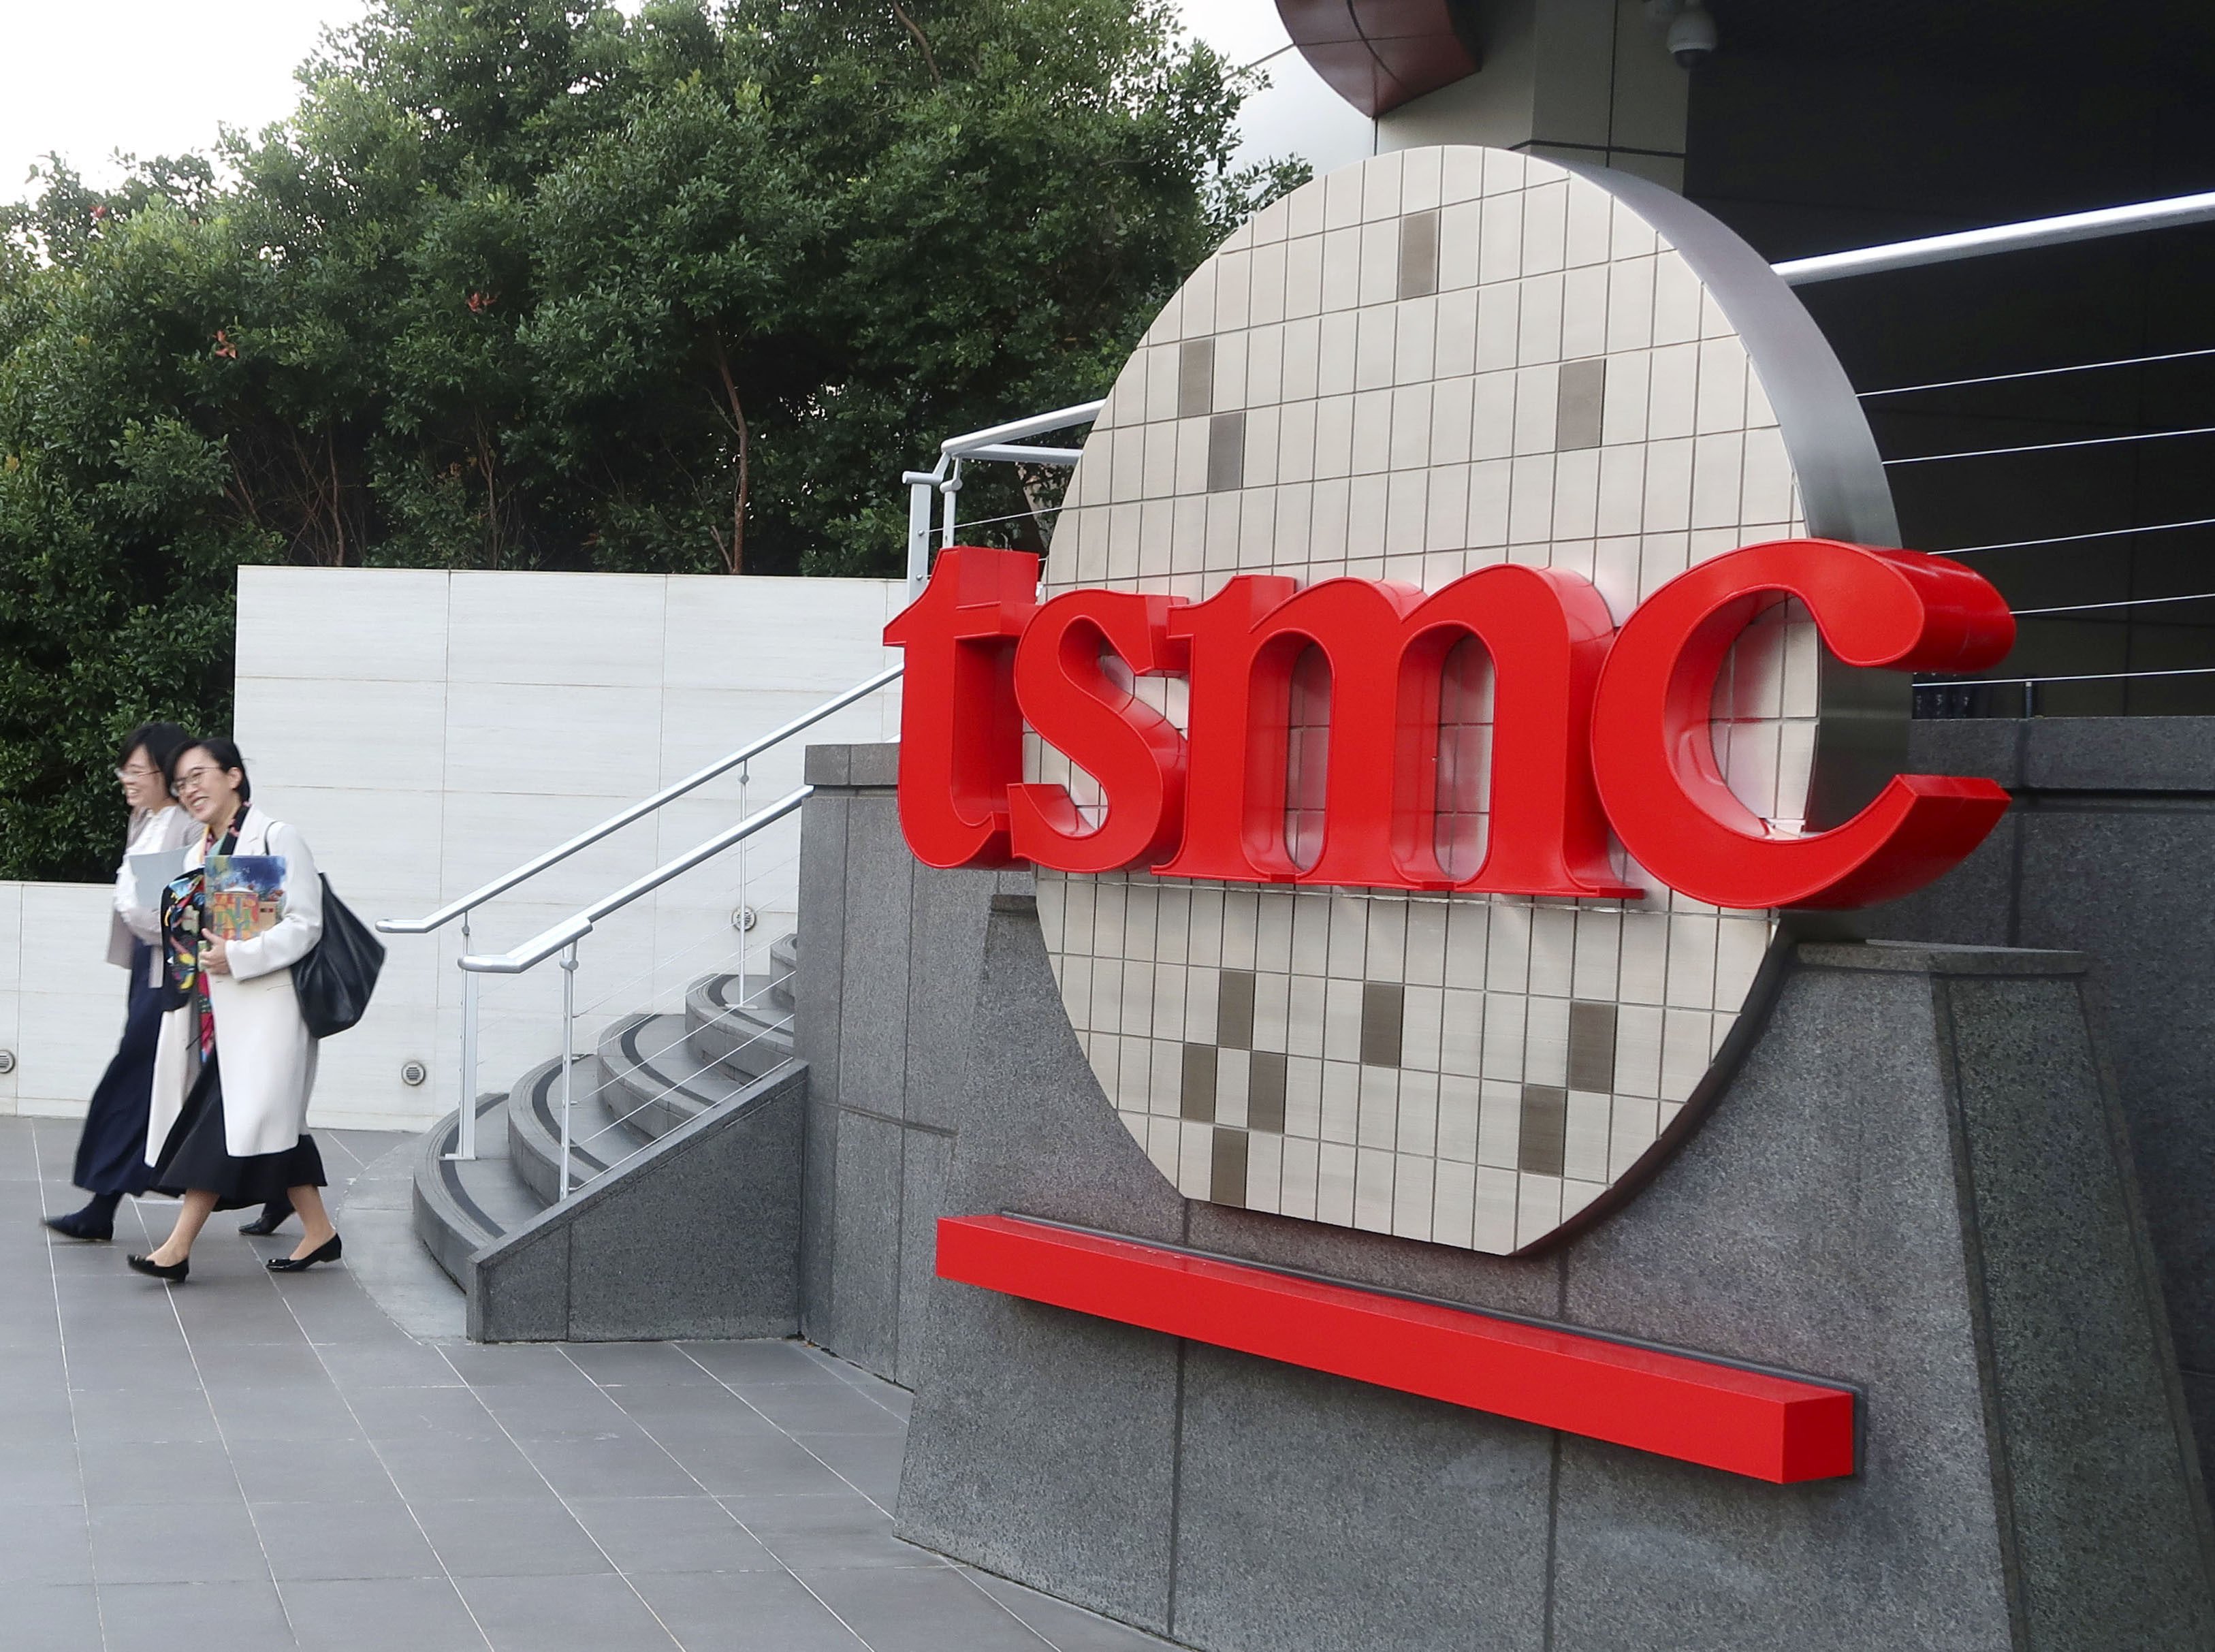 The logo of Taiwan Semiconductor Manufacturing Co seen at its headquarters inside the Hsinchu Science Park in Taiwan. Photo: Kyodo